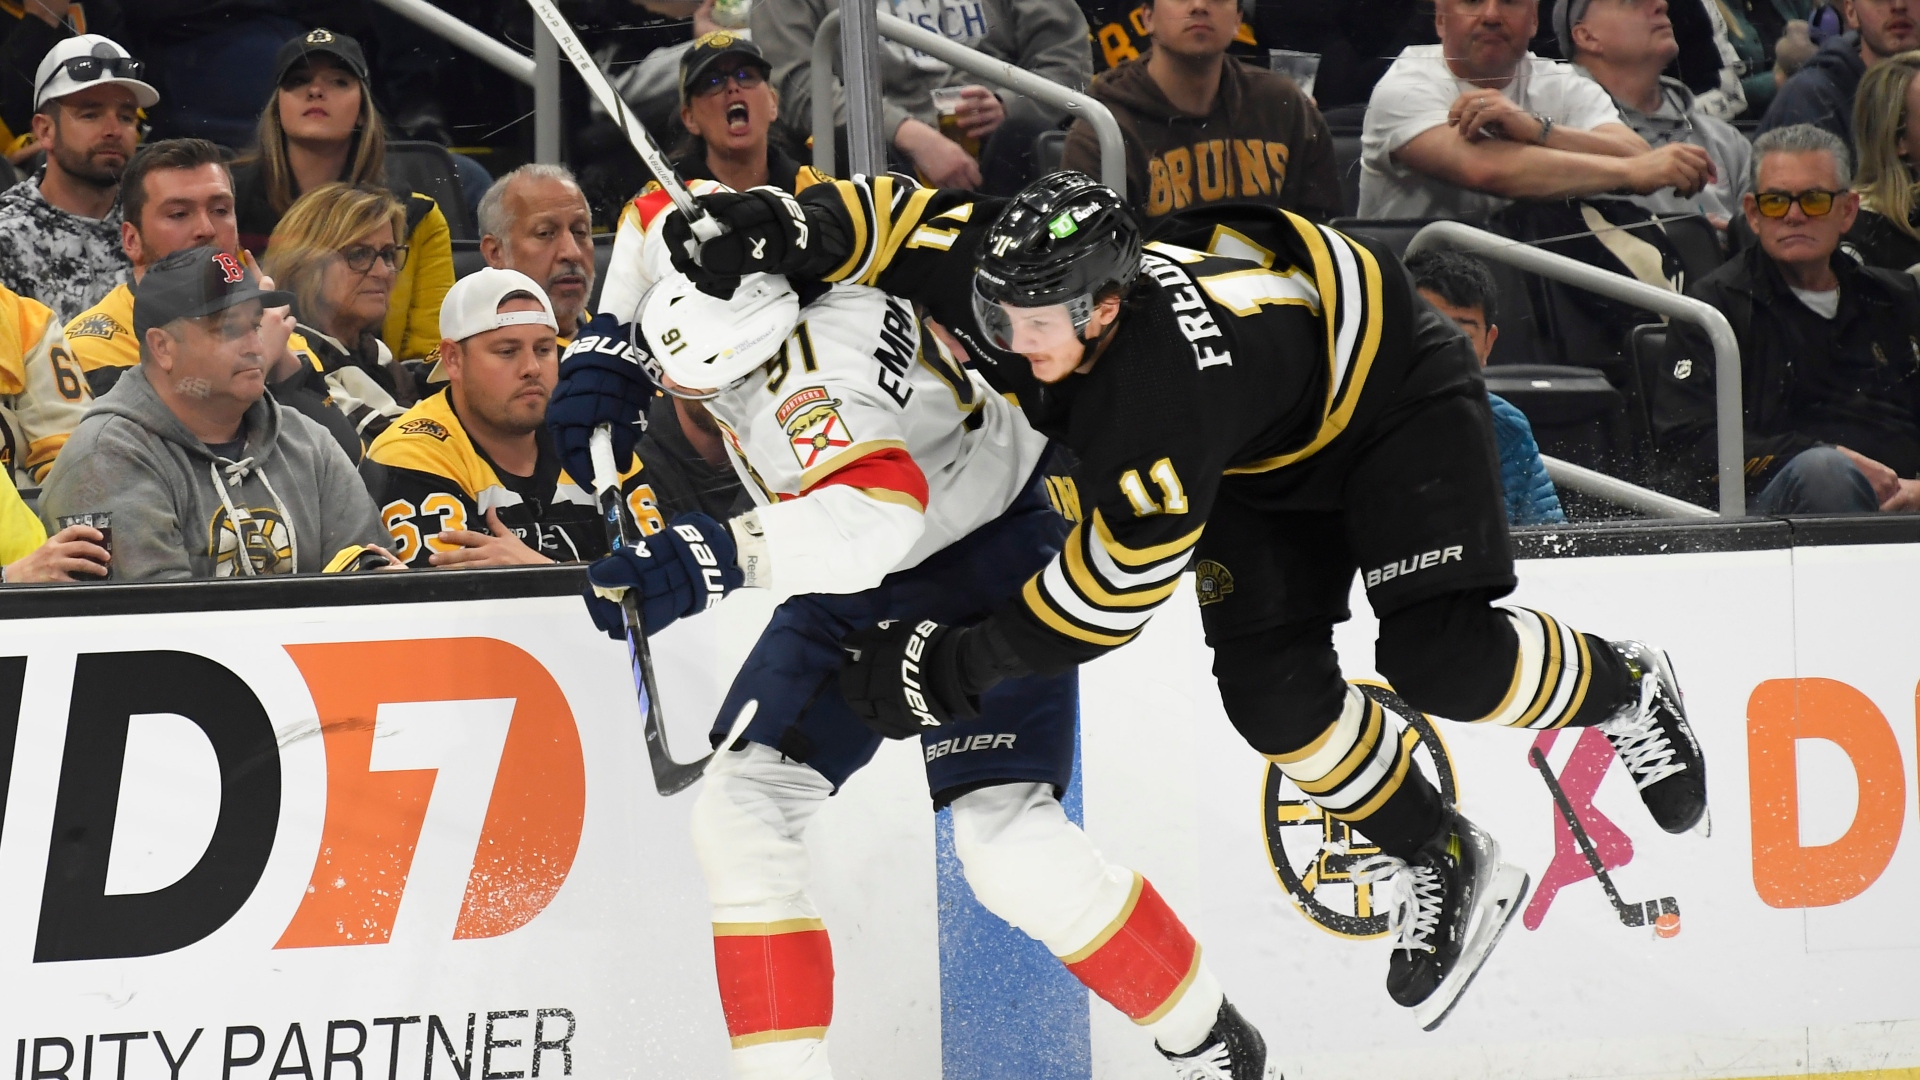 Bruins Ignore Excuses, Shoulder Responsibility For Series Deficit